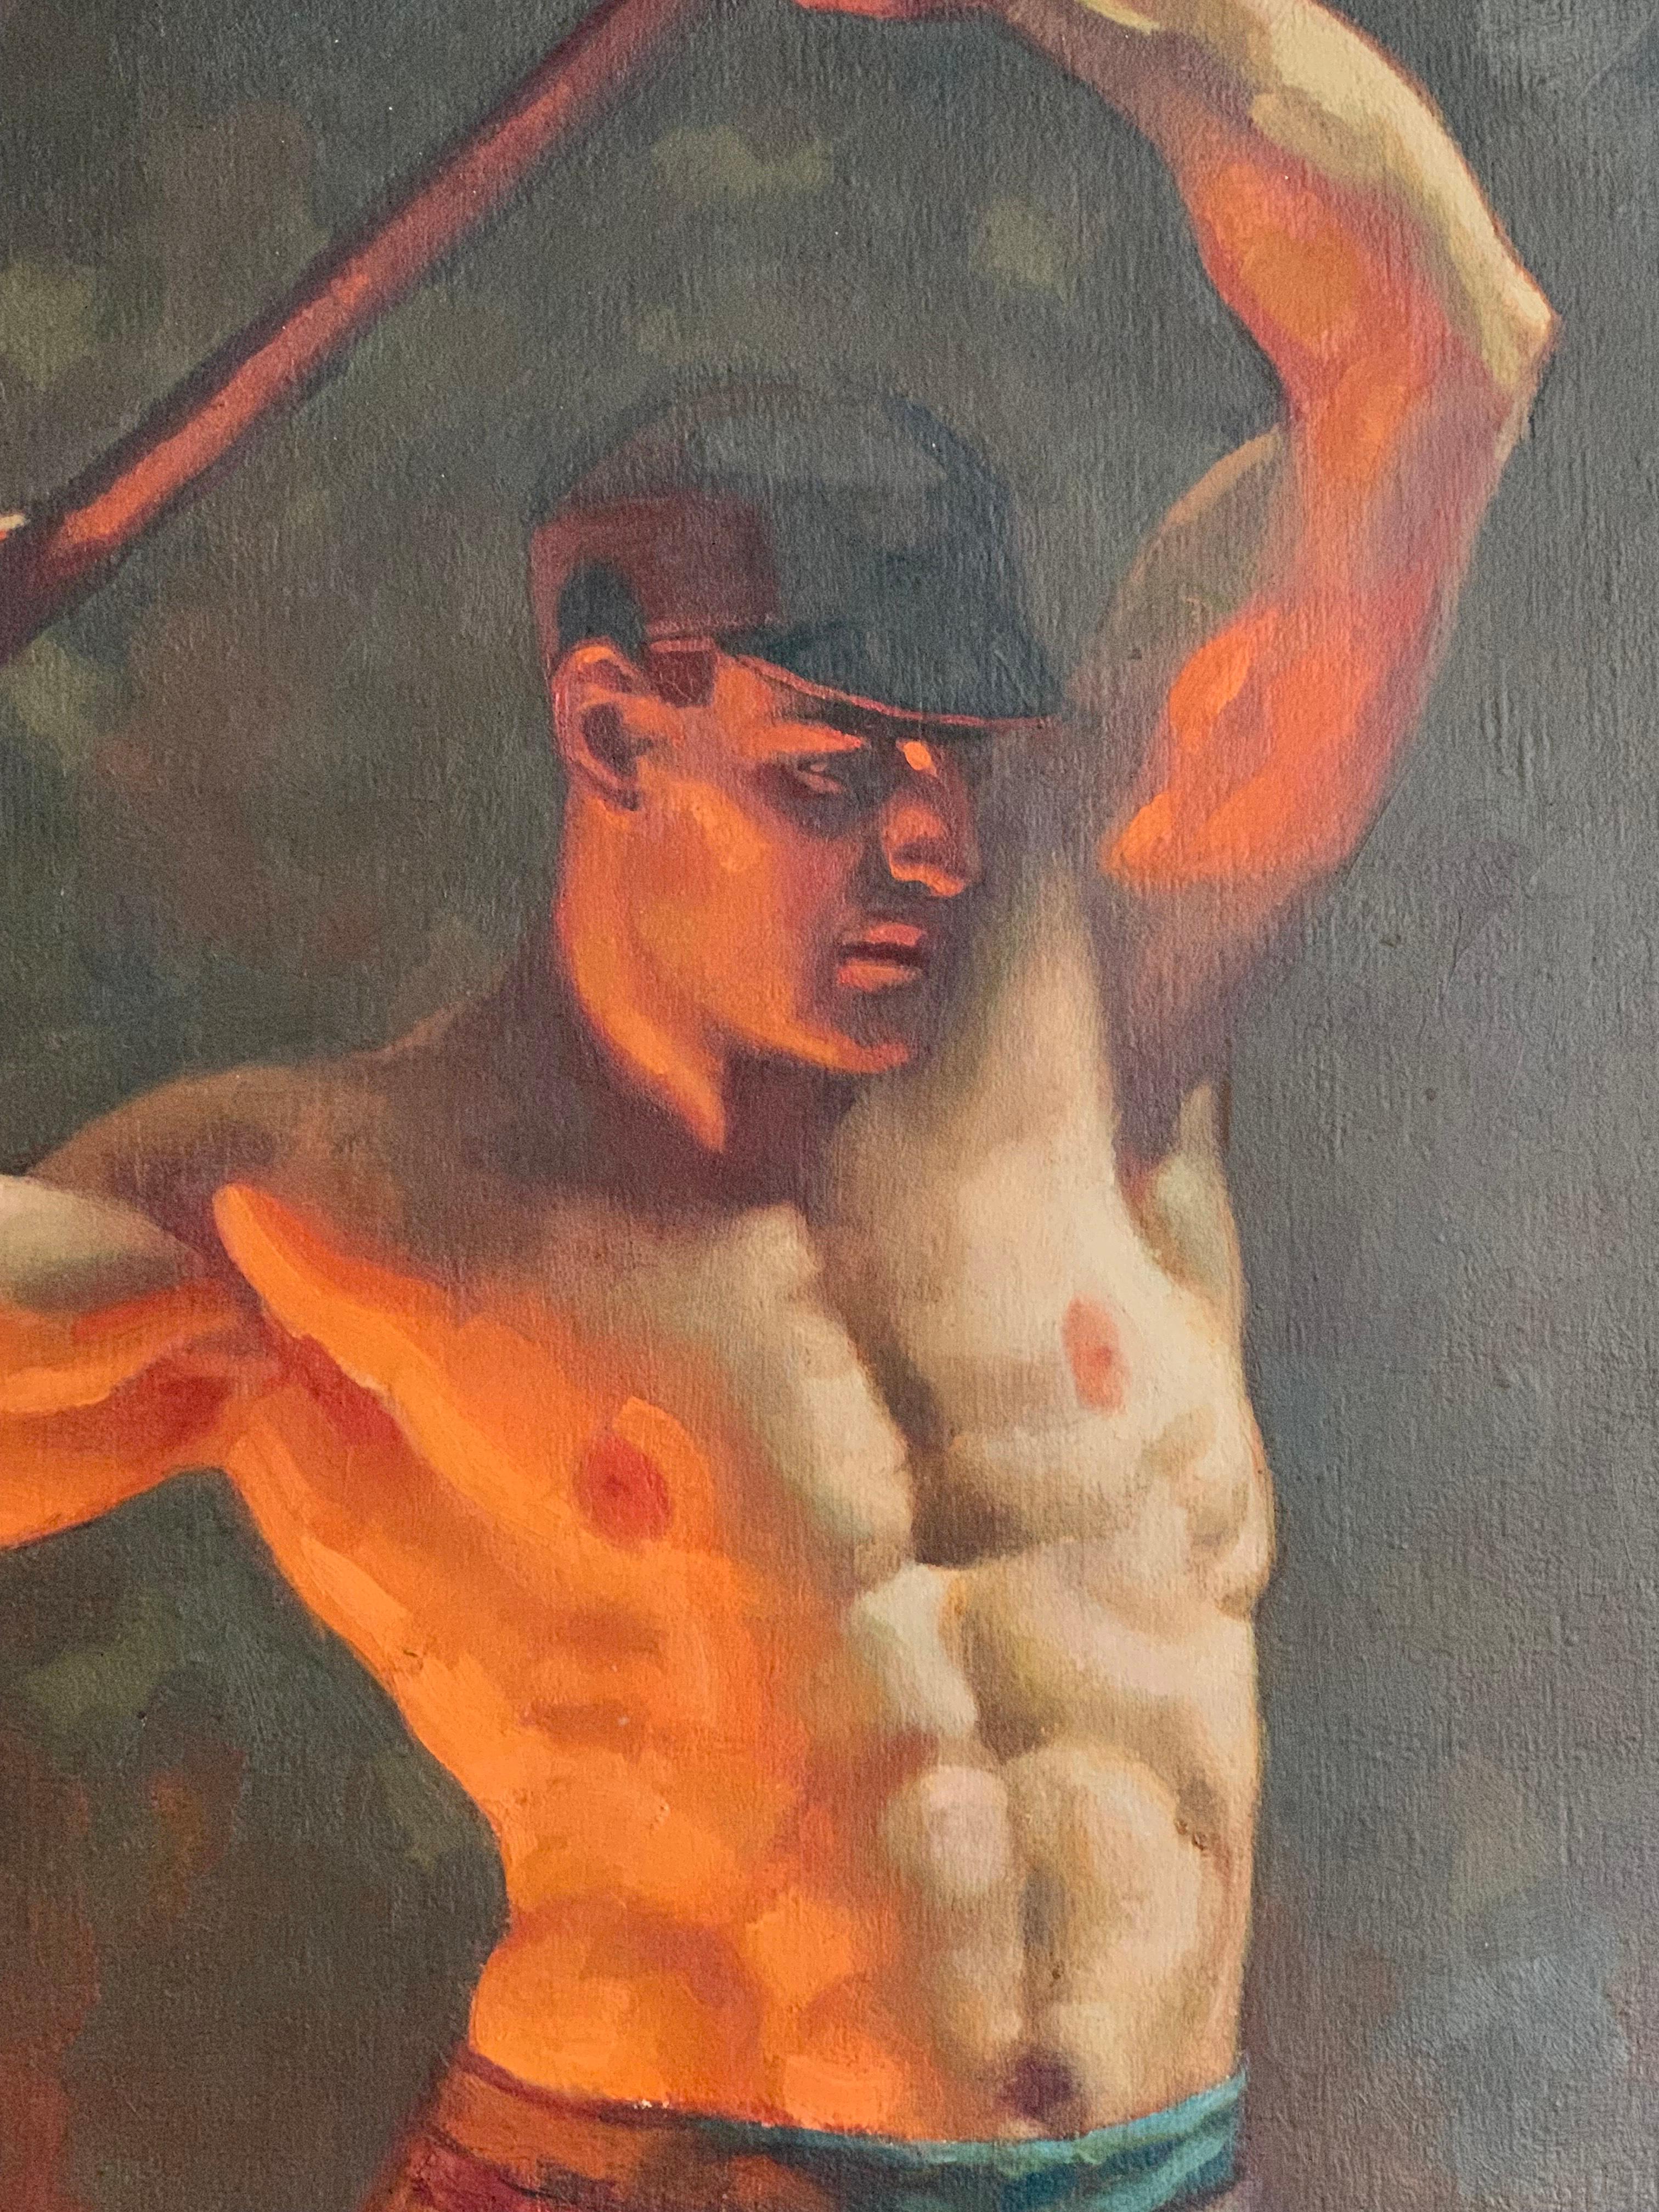 To our knowledge, this painting of an ironworker with his Hammer raised behind him, glowing from the furnace nearby, is the most important of a series of paintings by John Garth depicting American Industrial workers in the 1920s and 1930s. An